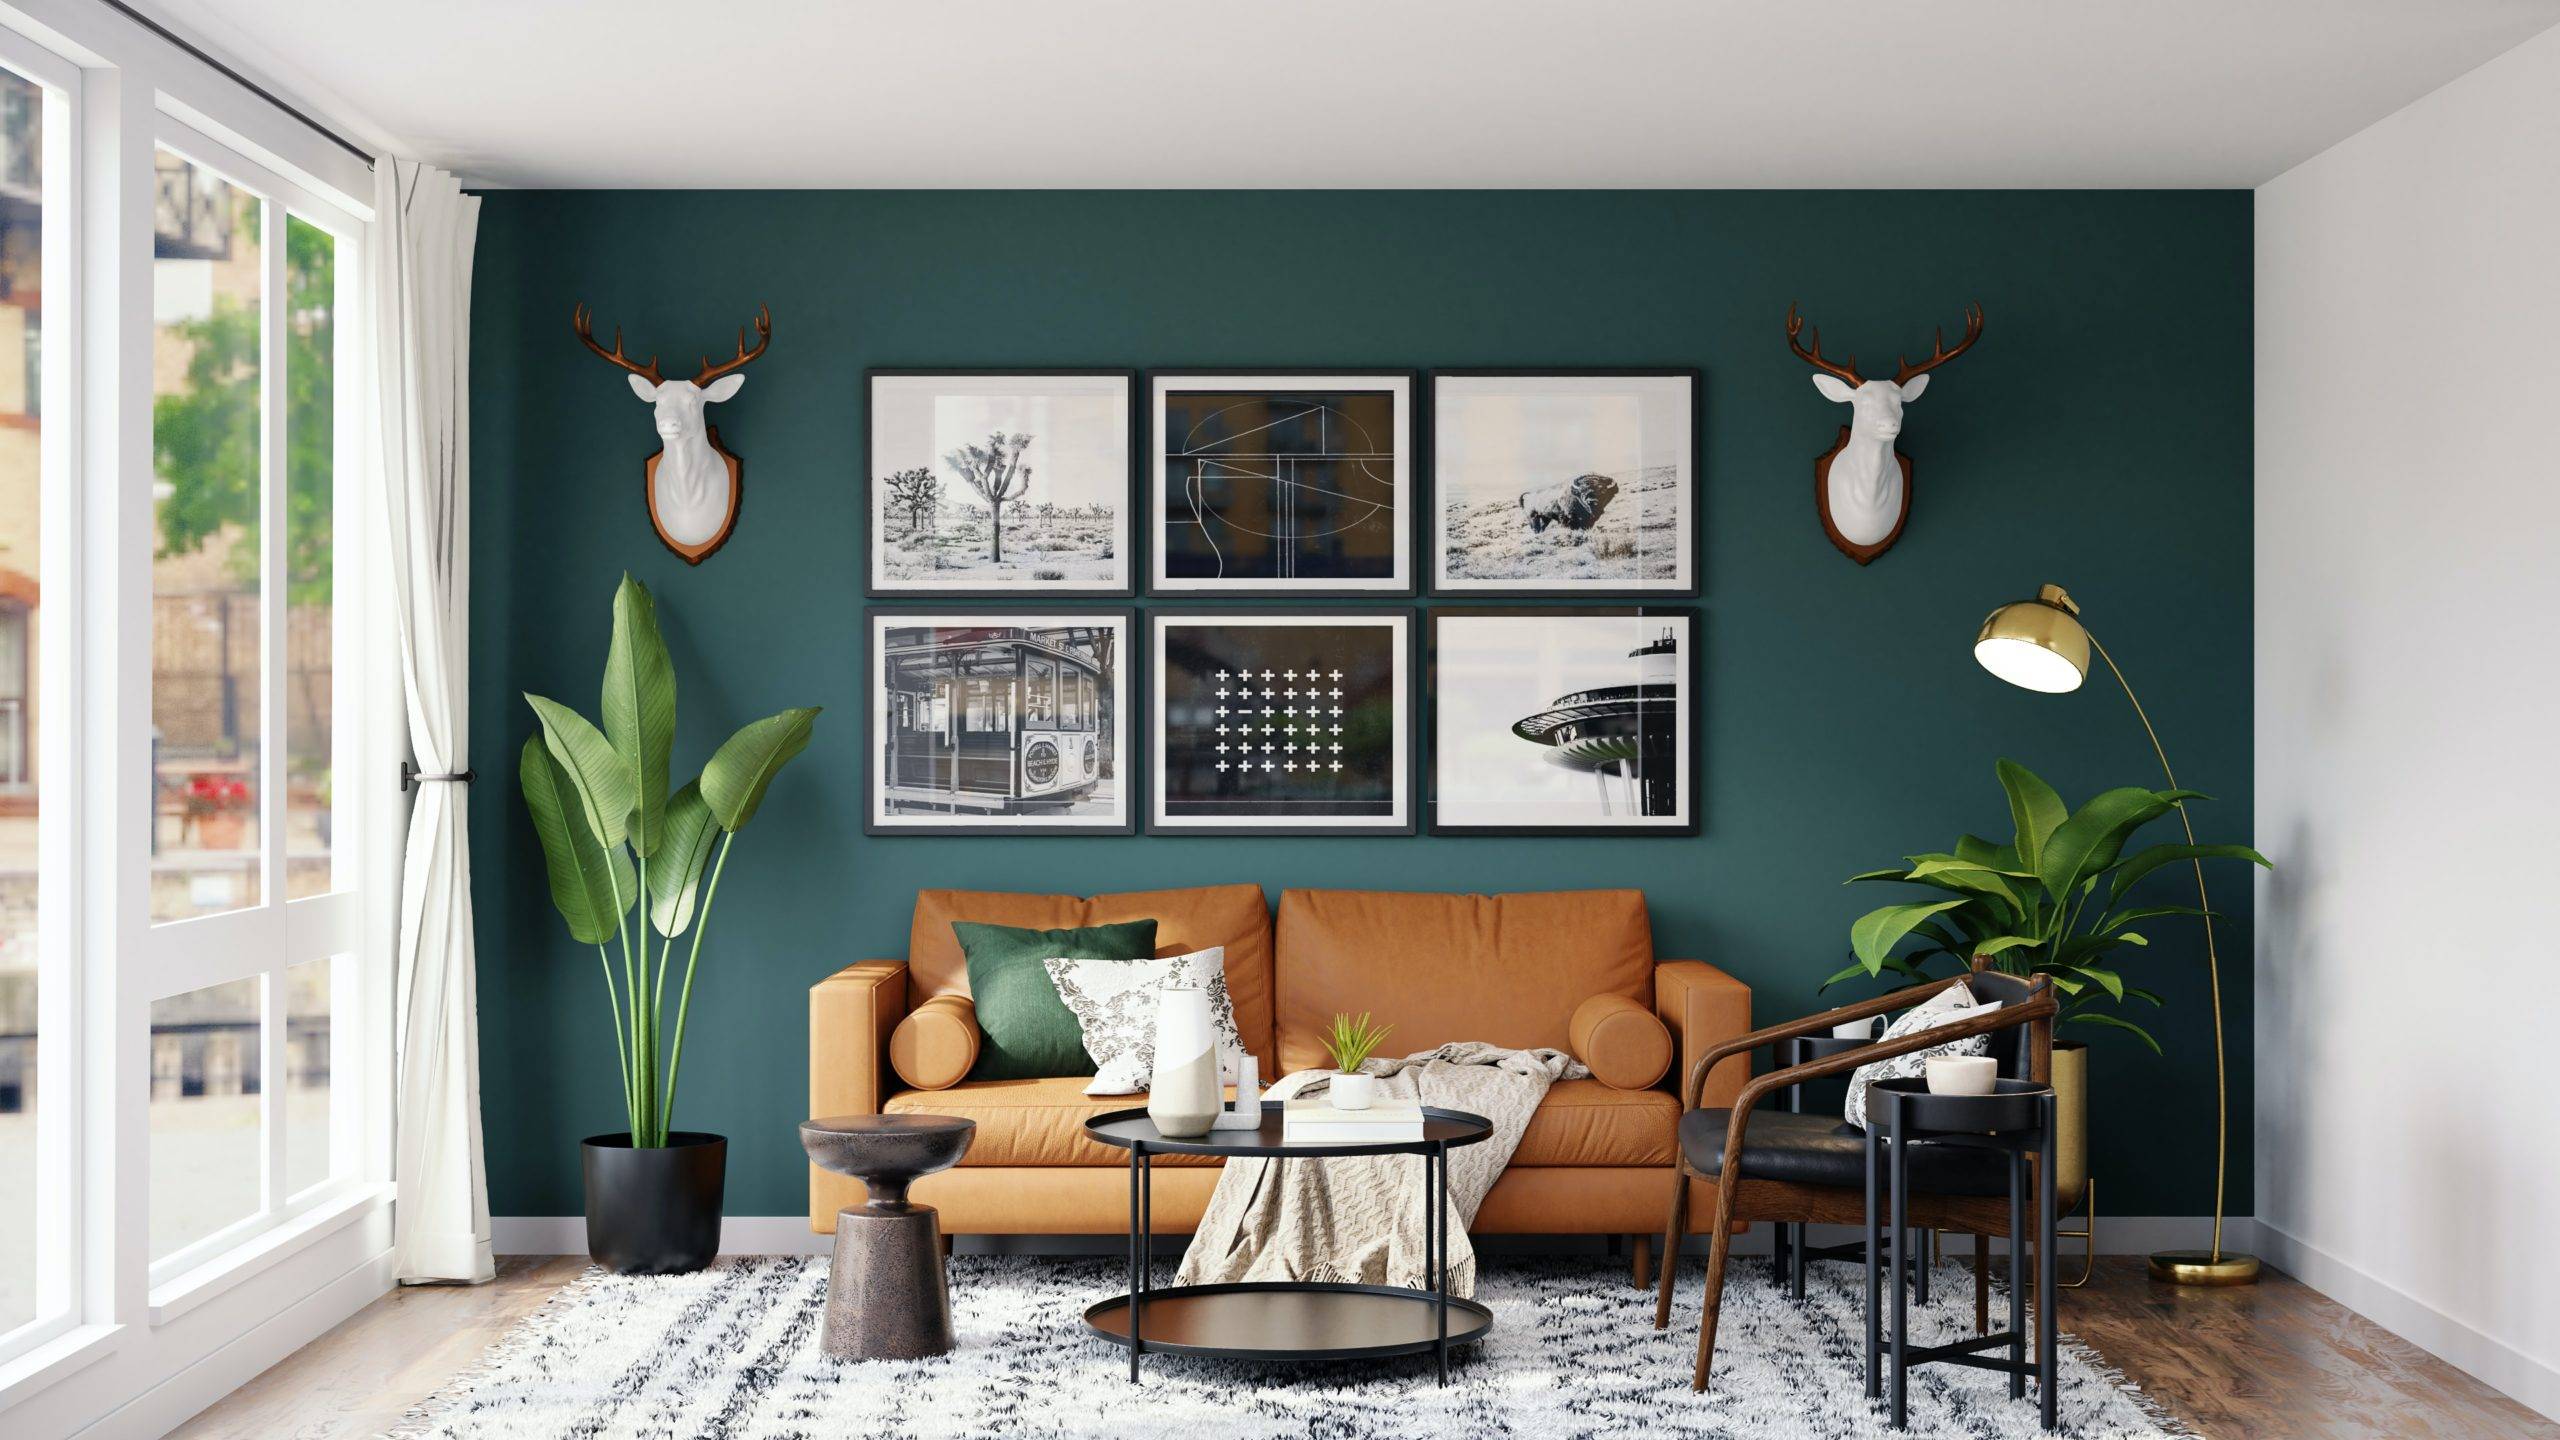 Modern living room inspired by the forest (from Unsplash)